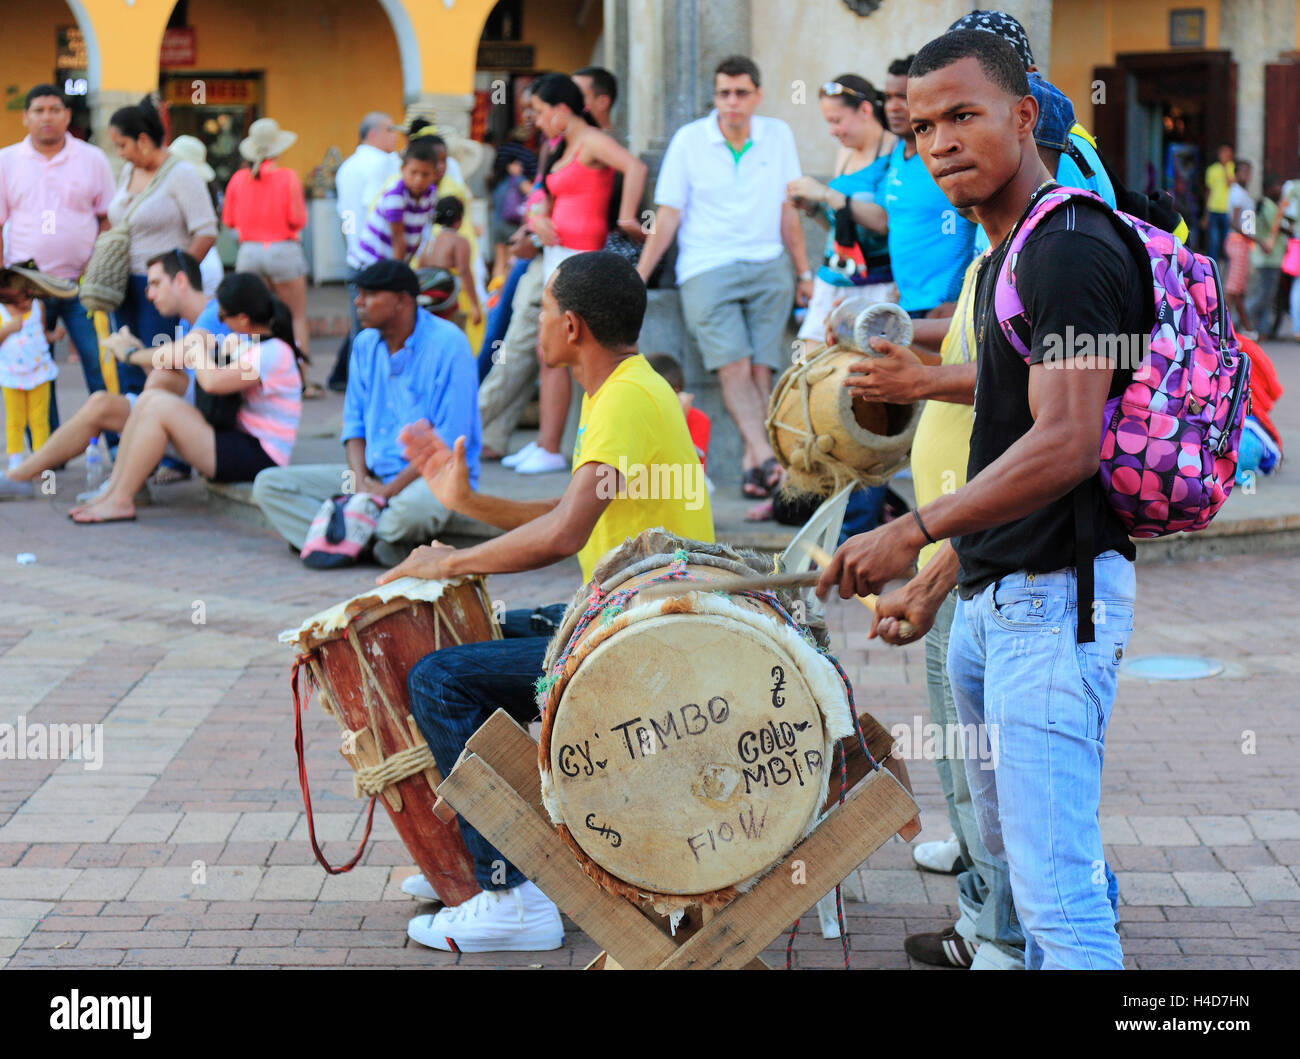 The republic Colombia, Departamento Bolivar, city Cartagena de Indias, musicians, young people make music in the Old Town, Stock Photo